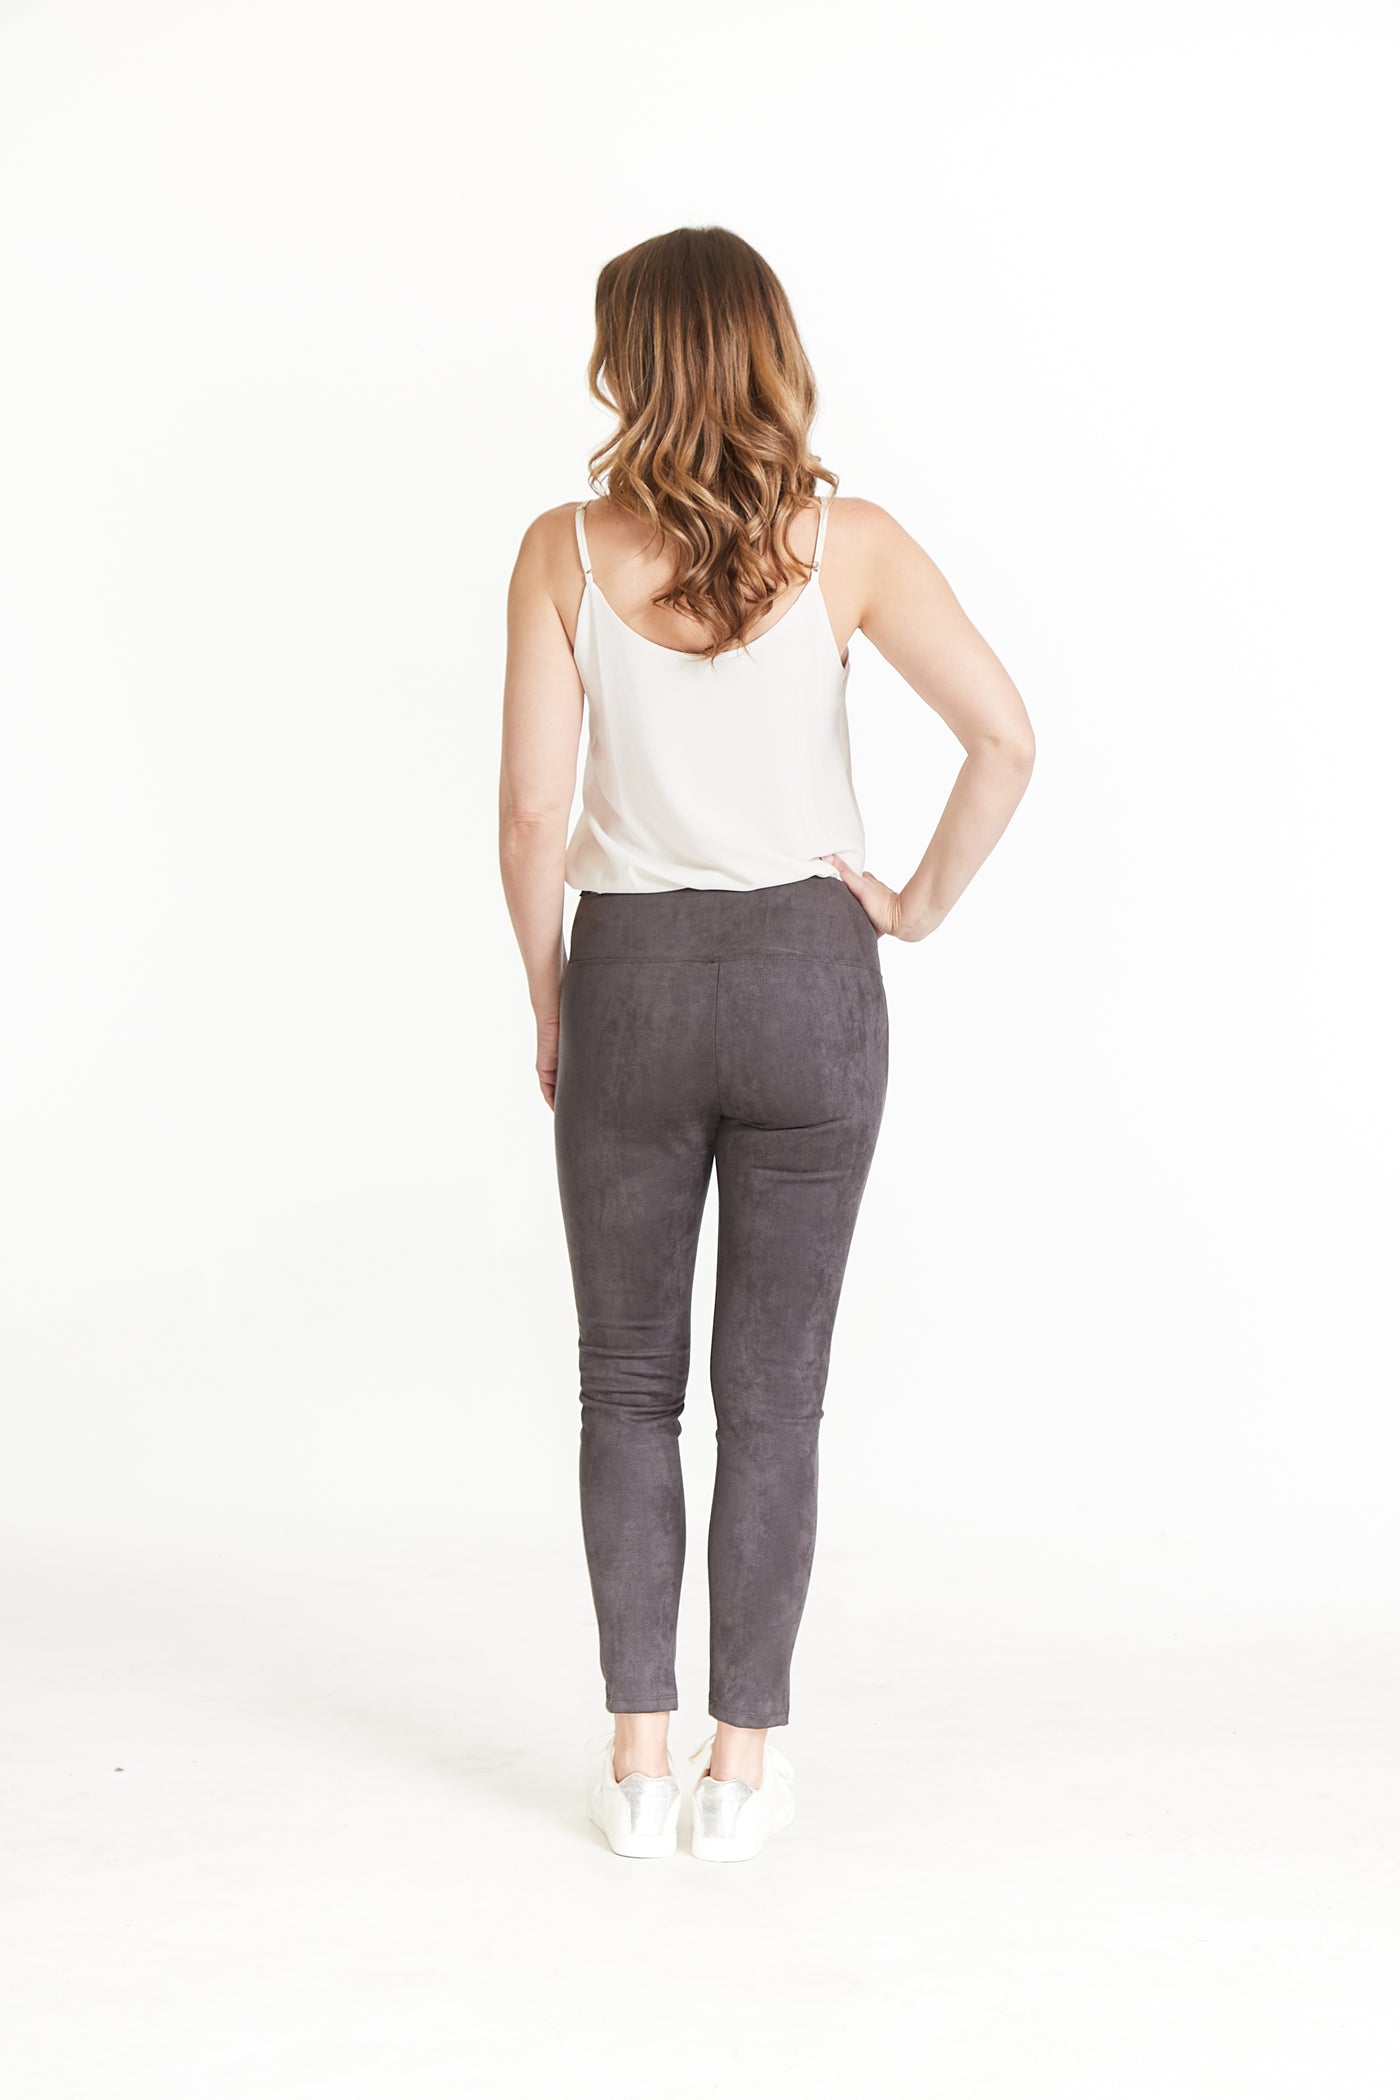 WIDE BAND PULL-ON ANKLE LEGGING - Dark Charcoal